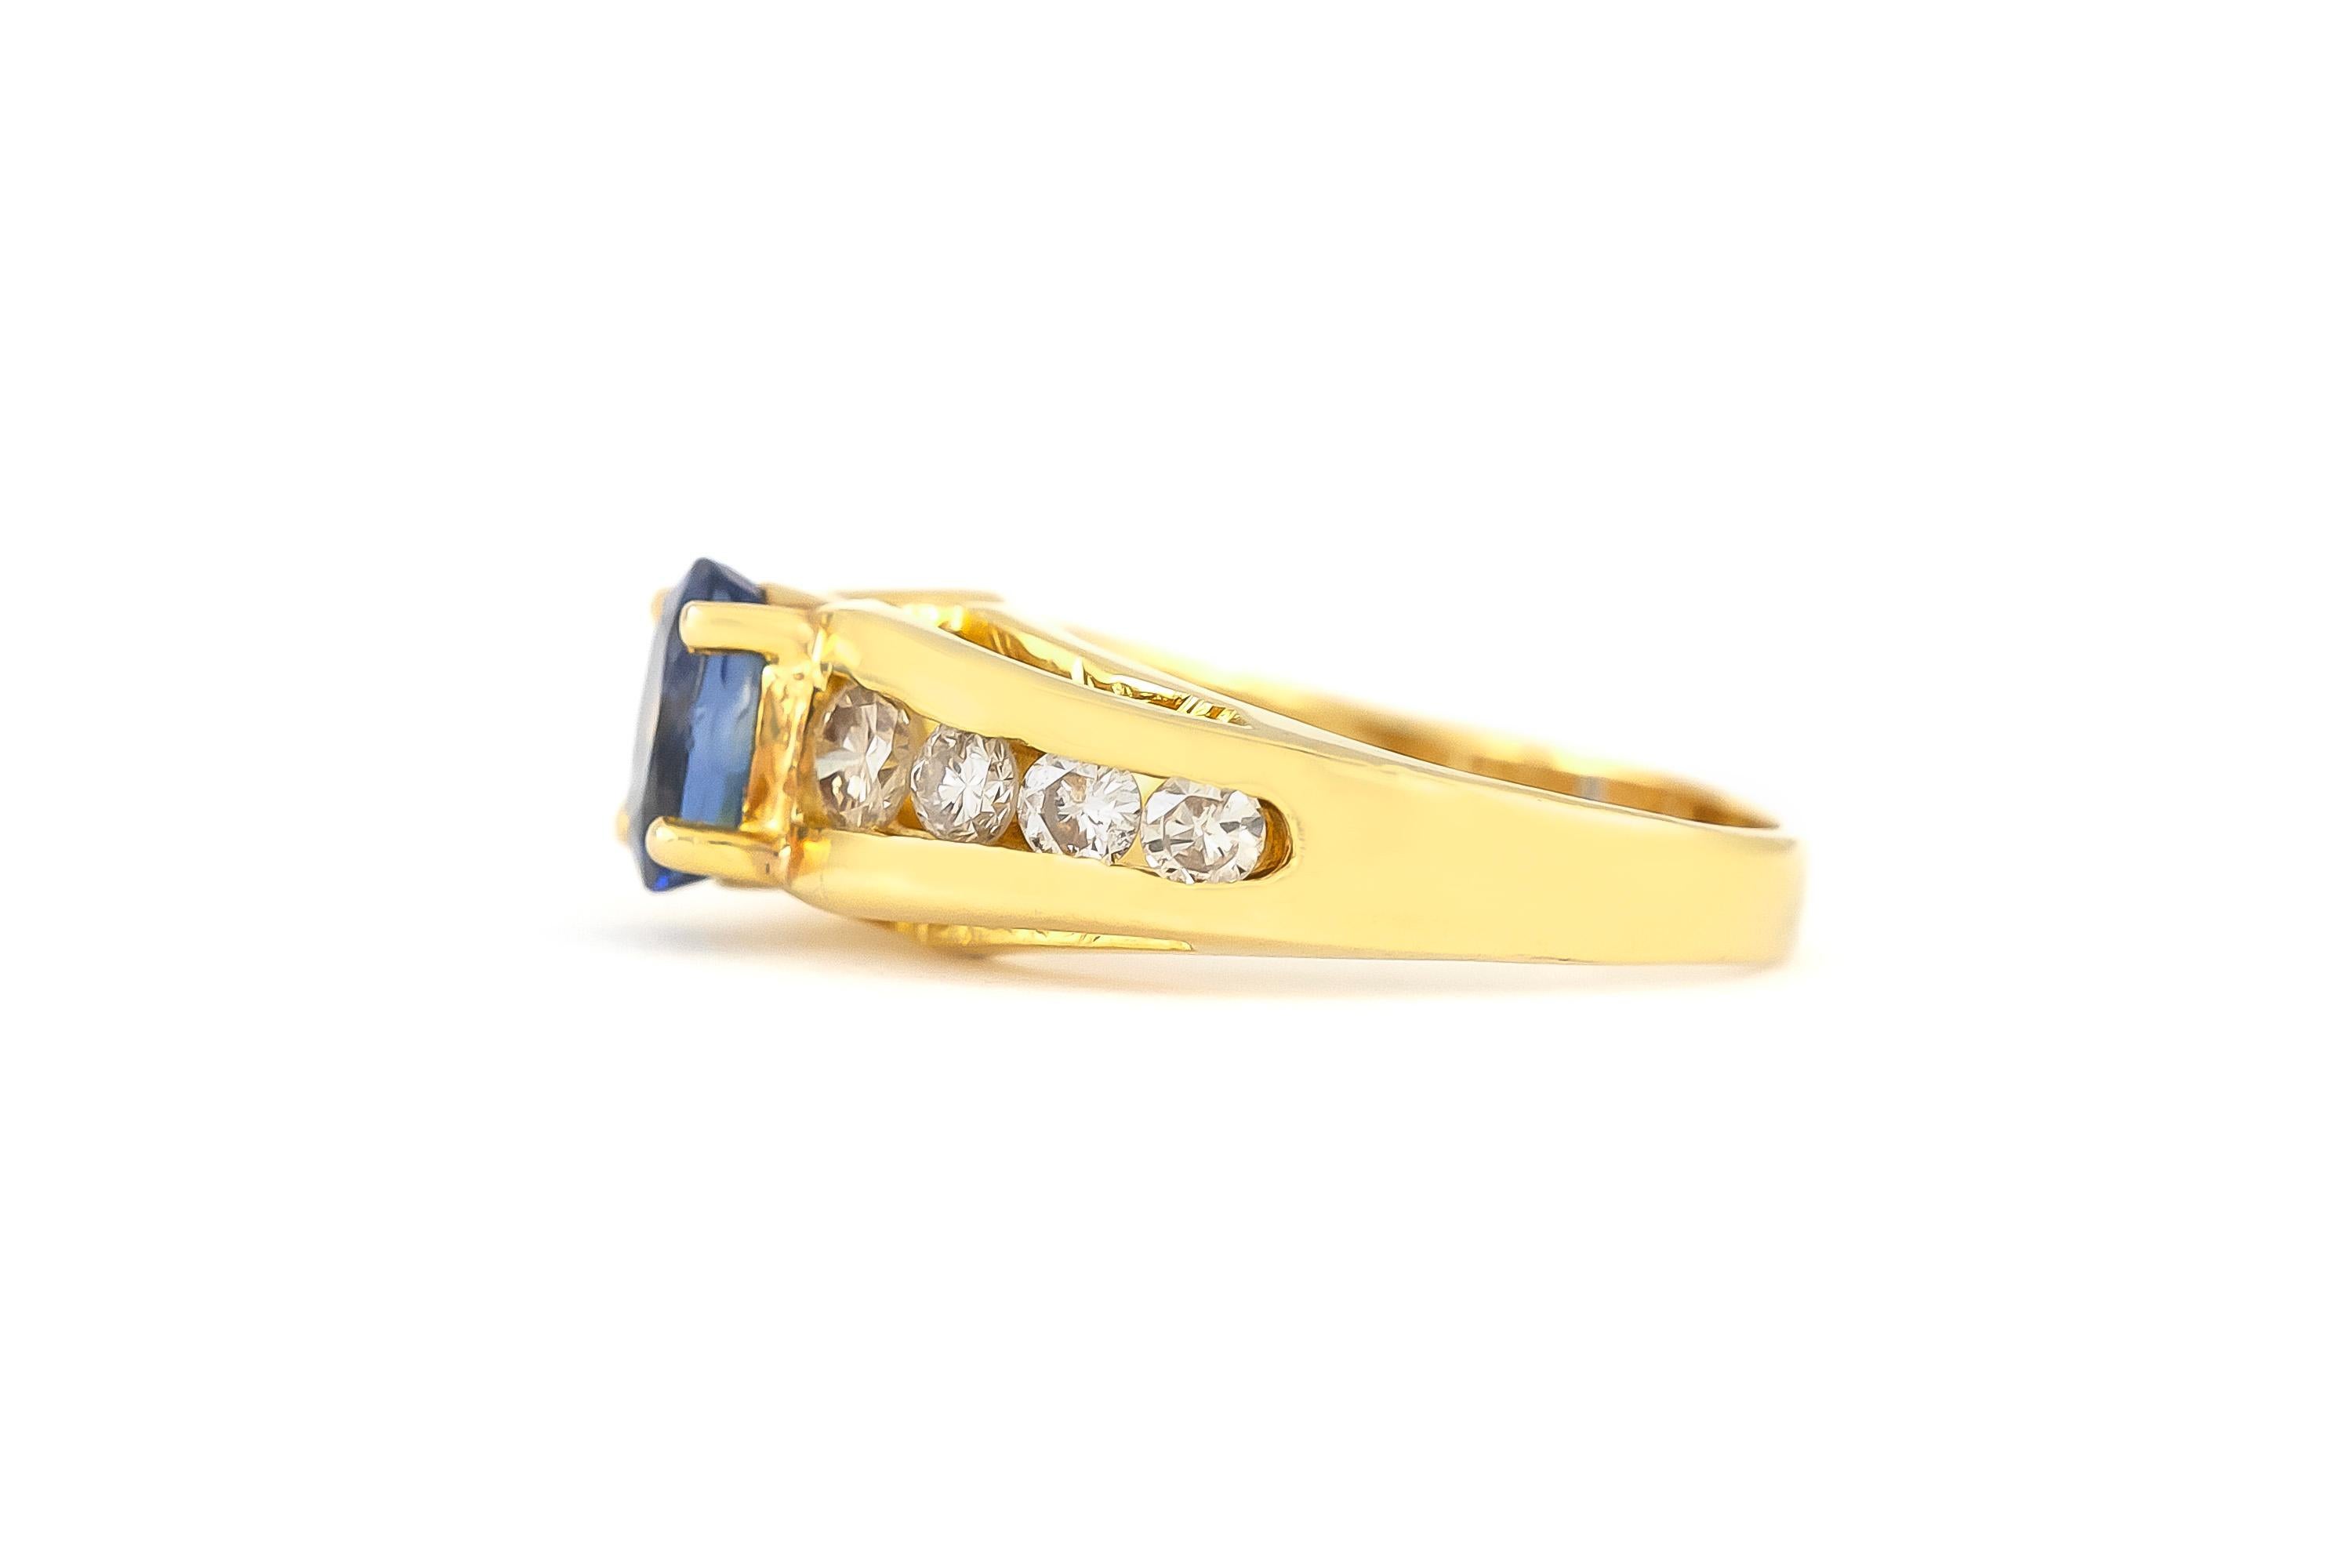 The ring is finely crafted in 14k yellow gold with diamonds weighing approximately total of 0.73 carat and sapphire weighing approximately total of 1.40 carat.
Circa 1980.